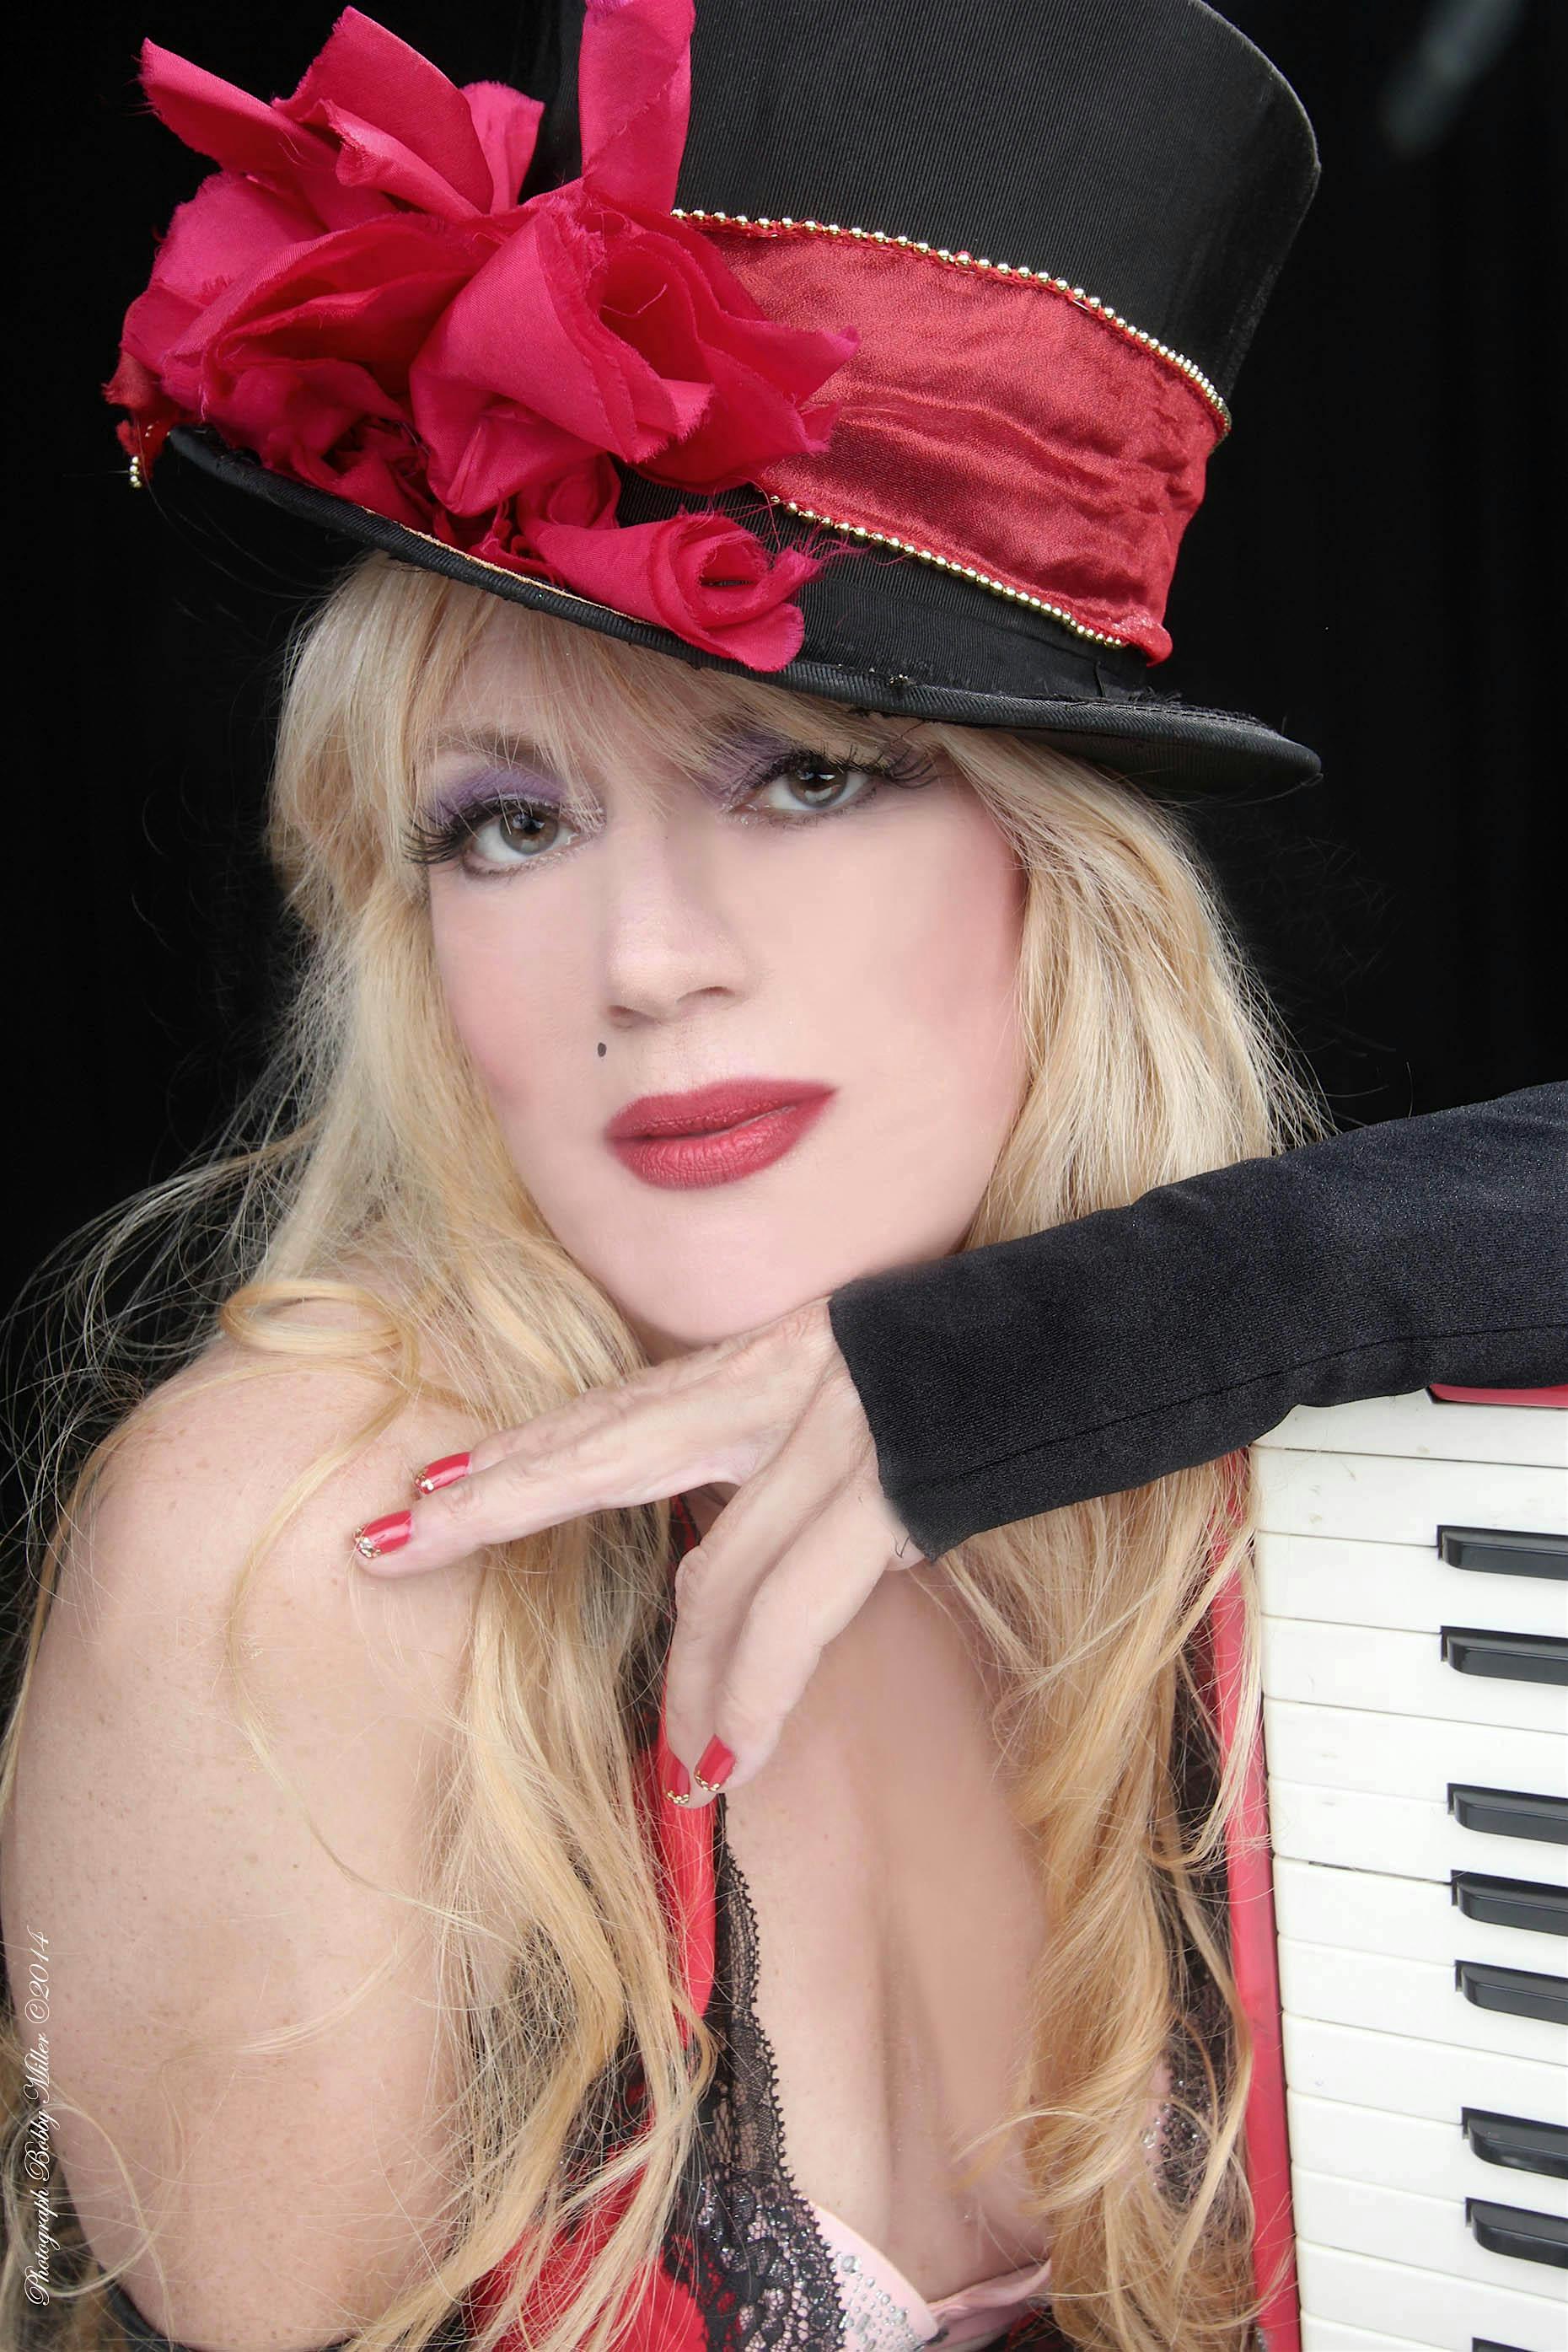 Phoebe Legere Lights Up The Skyline! New York Is Open For Music!